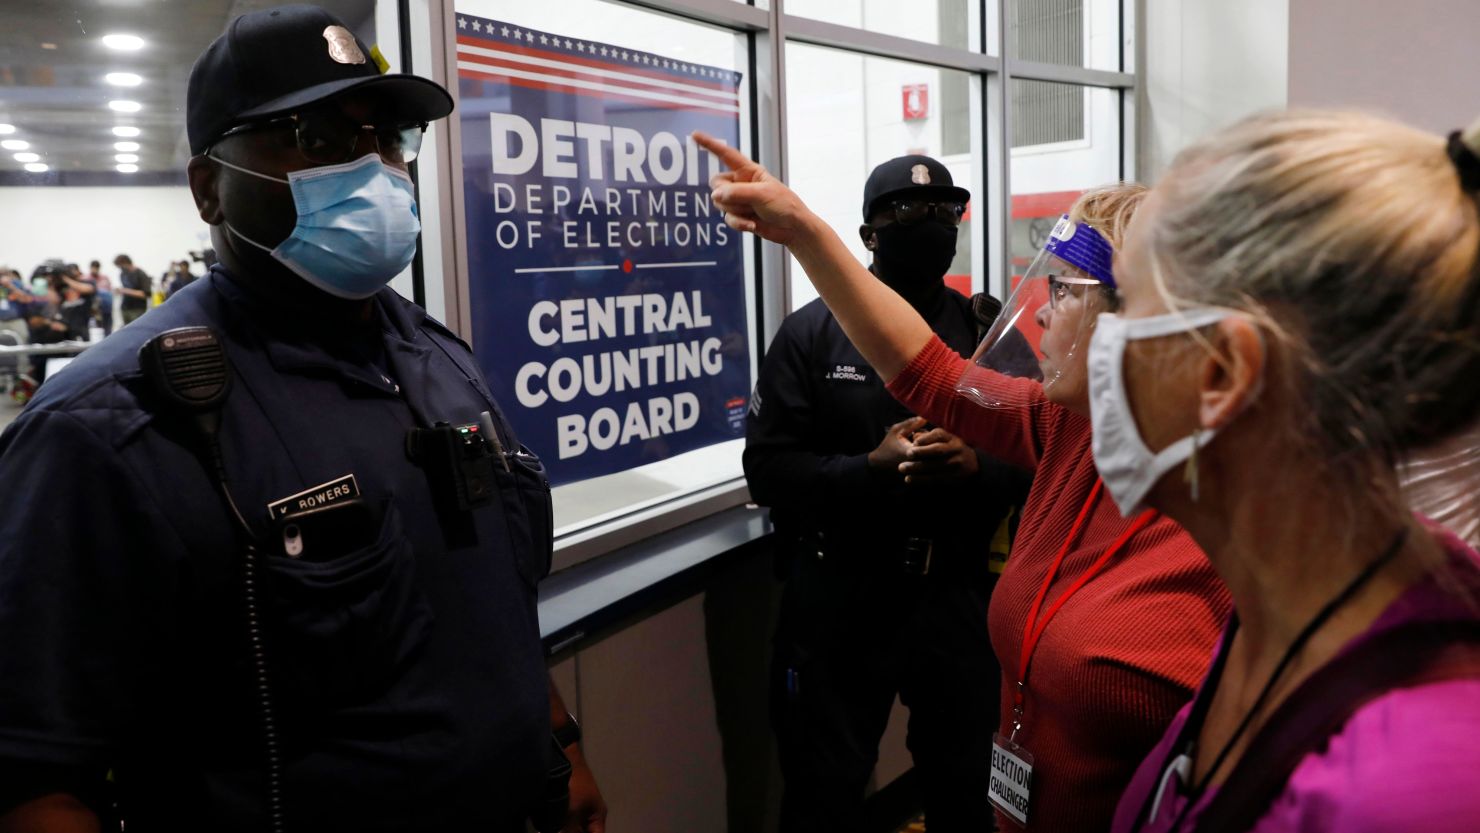 Police officers stand facing supporters of US President Donald Trump as they chant slogans outside the room where absentee ballots for the 2020 general election are being counted at TCF Center on November 4, 2020 in Detroit, Michigan.